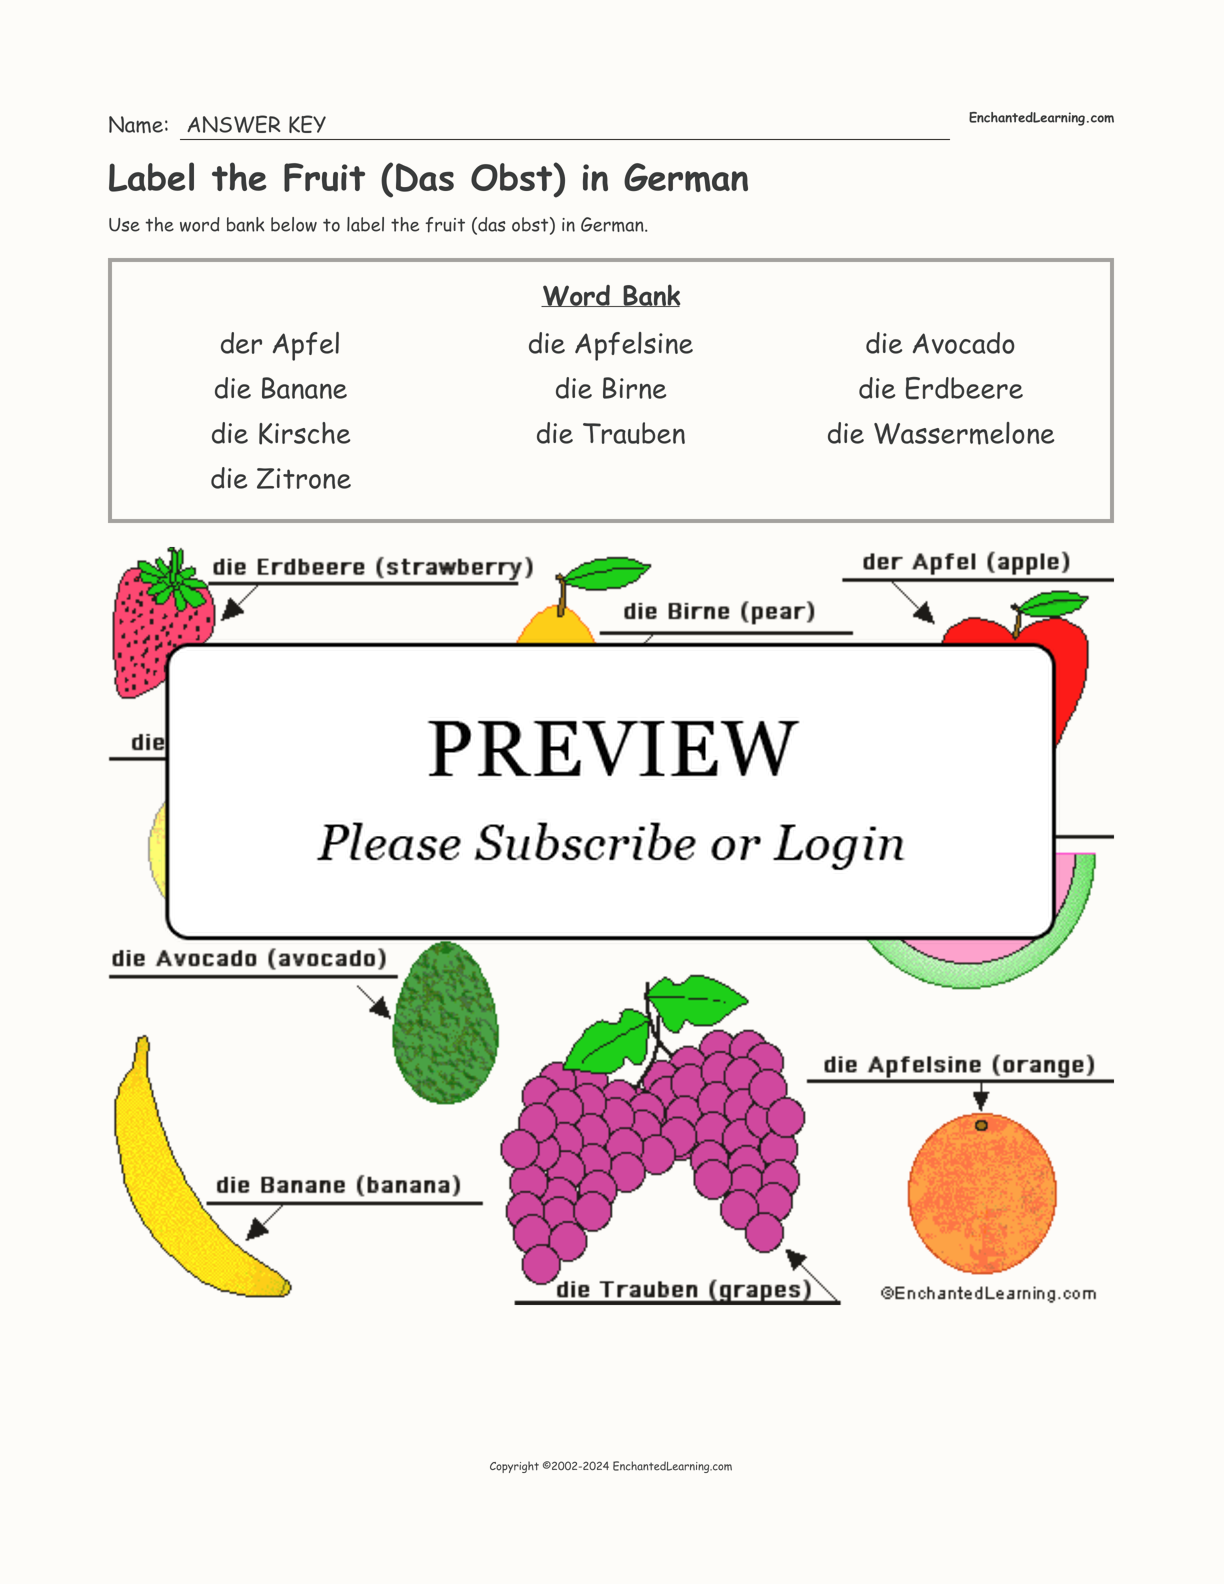 Label the Fruit (Das Obst) in German interactive worksheet page 2